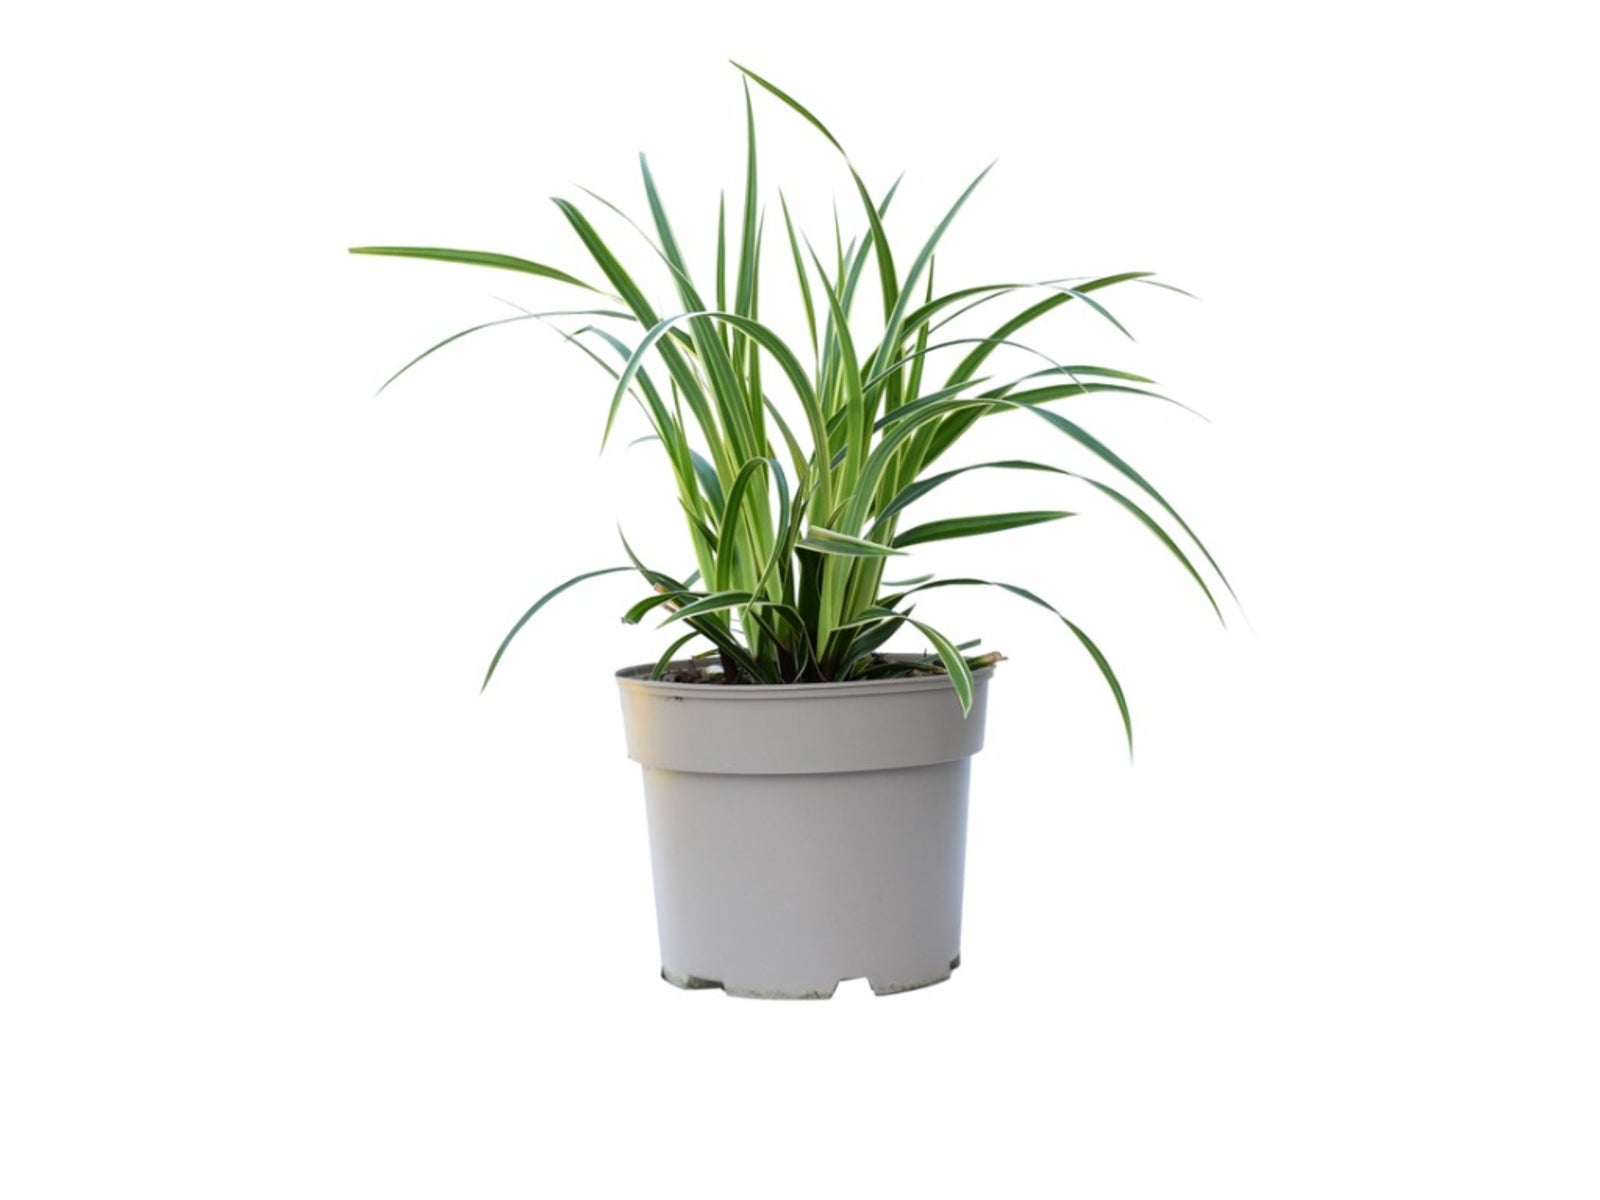 Caring For Potted Grasses - Tips For Growing Ornamental Grass In Containers